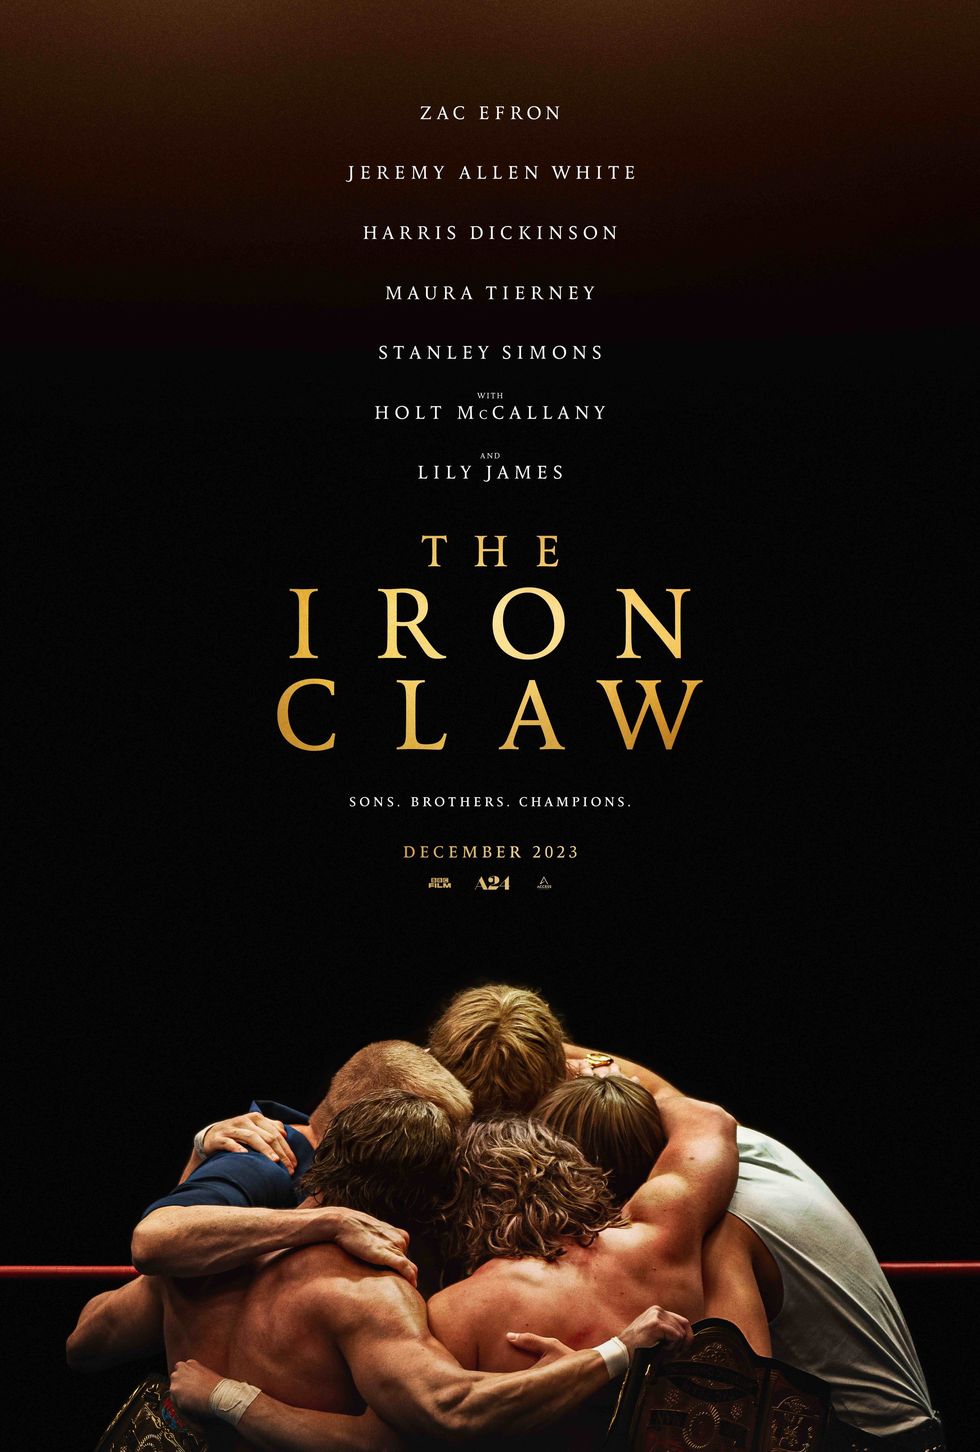 Buy 'The Iron Claw' Tickets